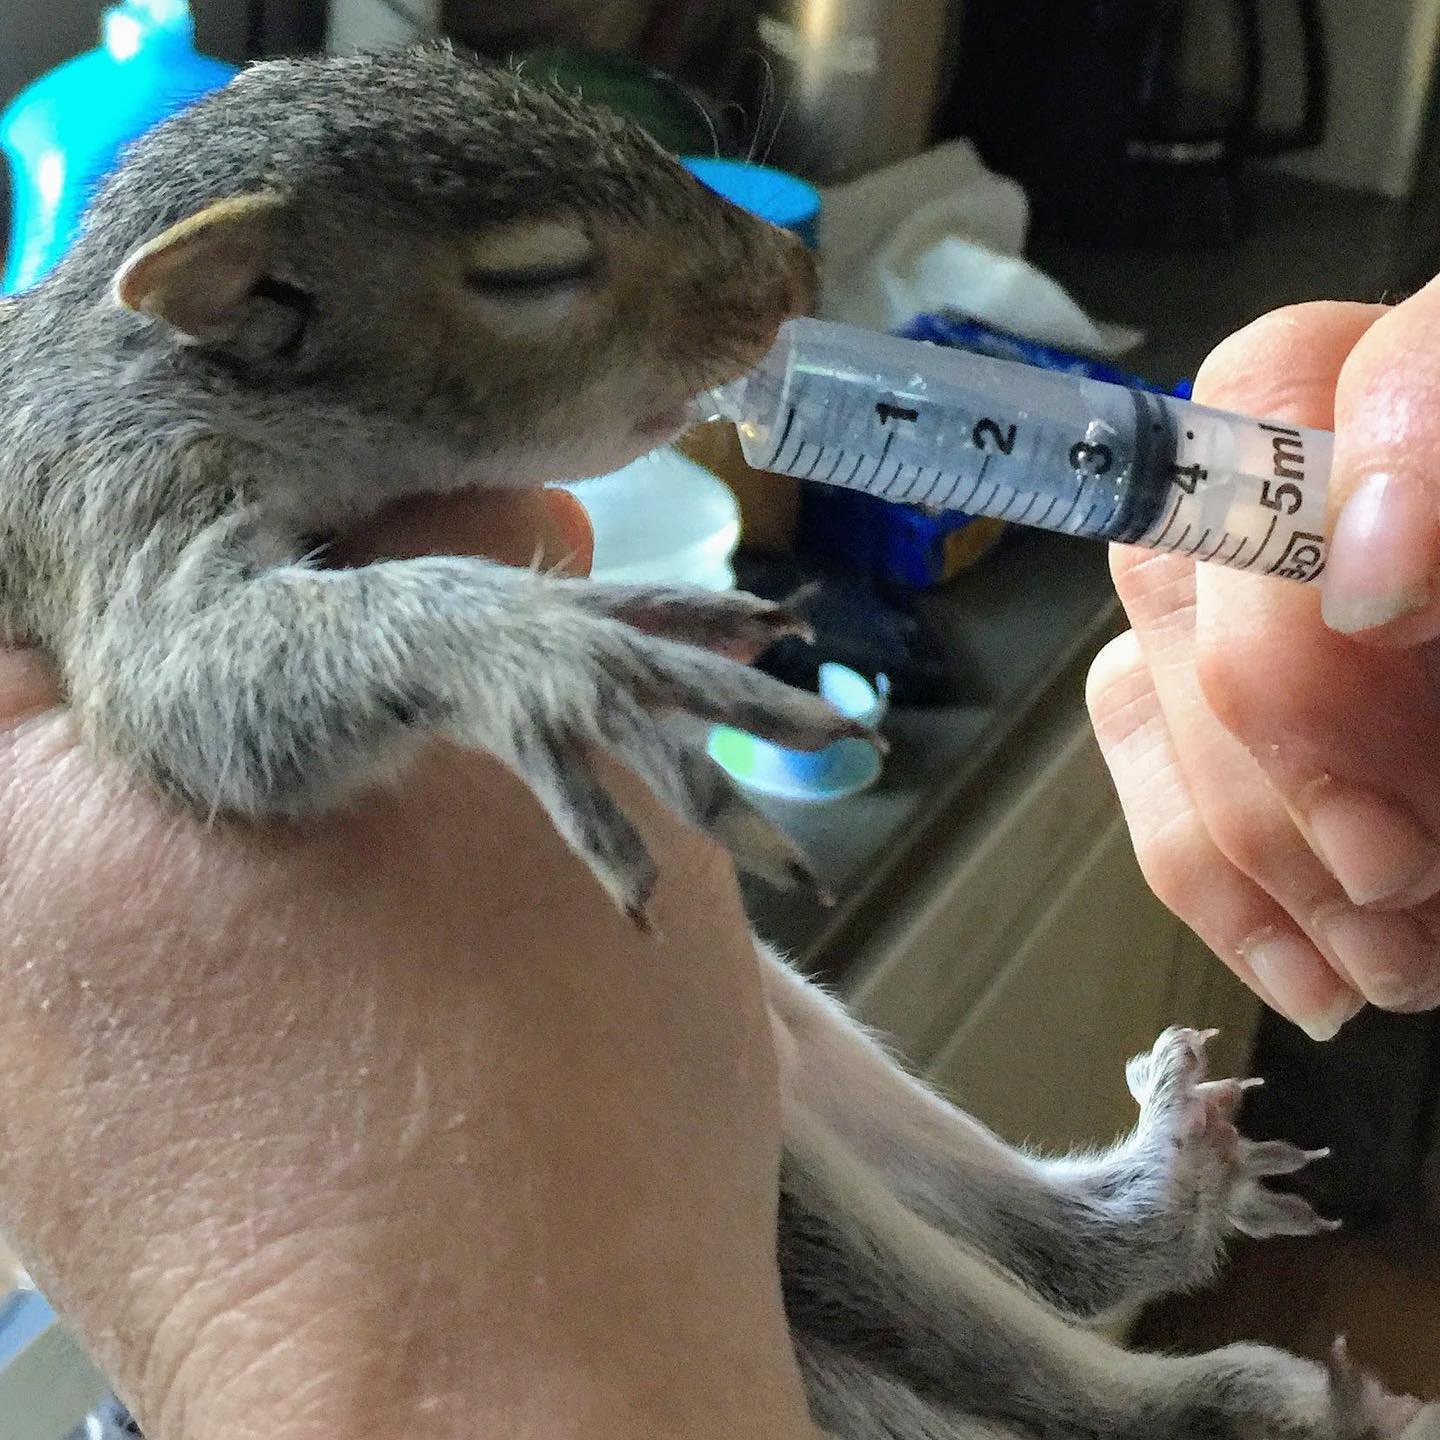 closeup of patty robinson's hands as she holds bunk the squirrel with one hand and feeds him with syringe with the other. bunk's eyes are closed.